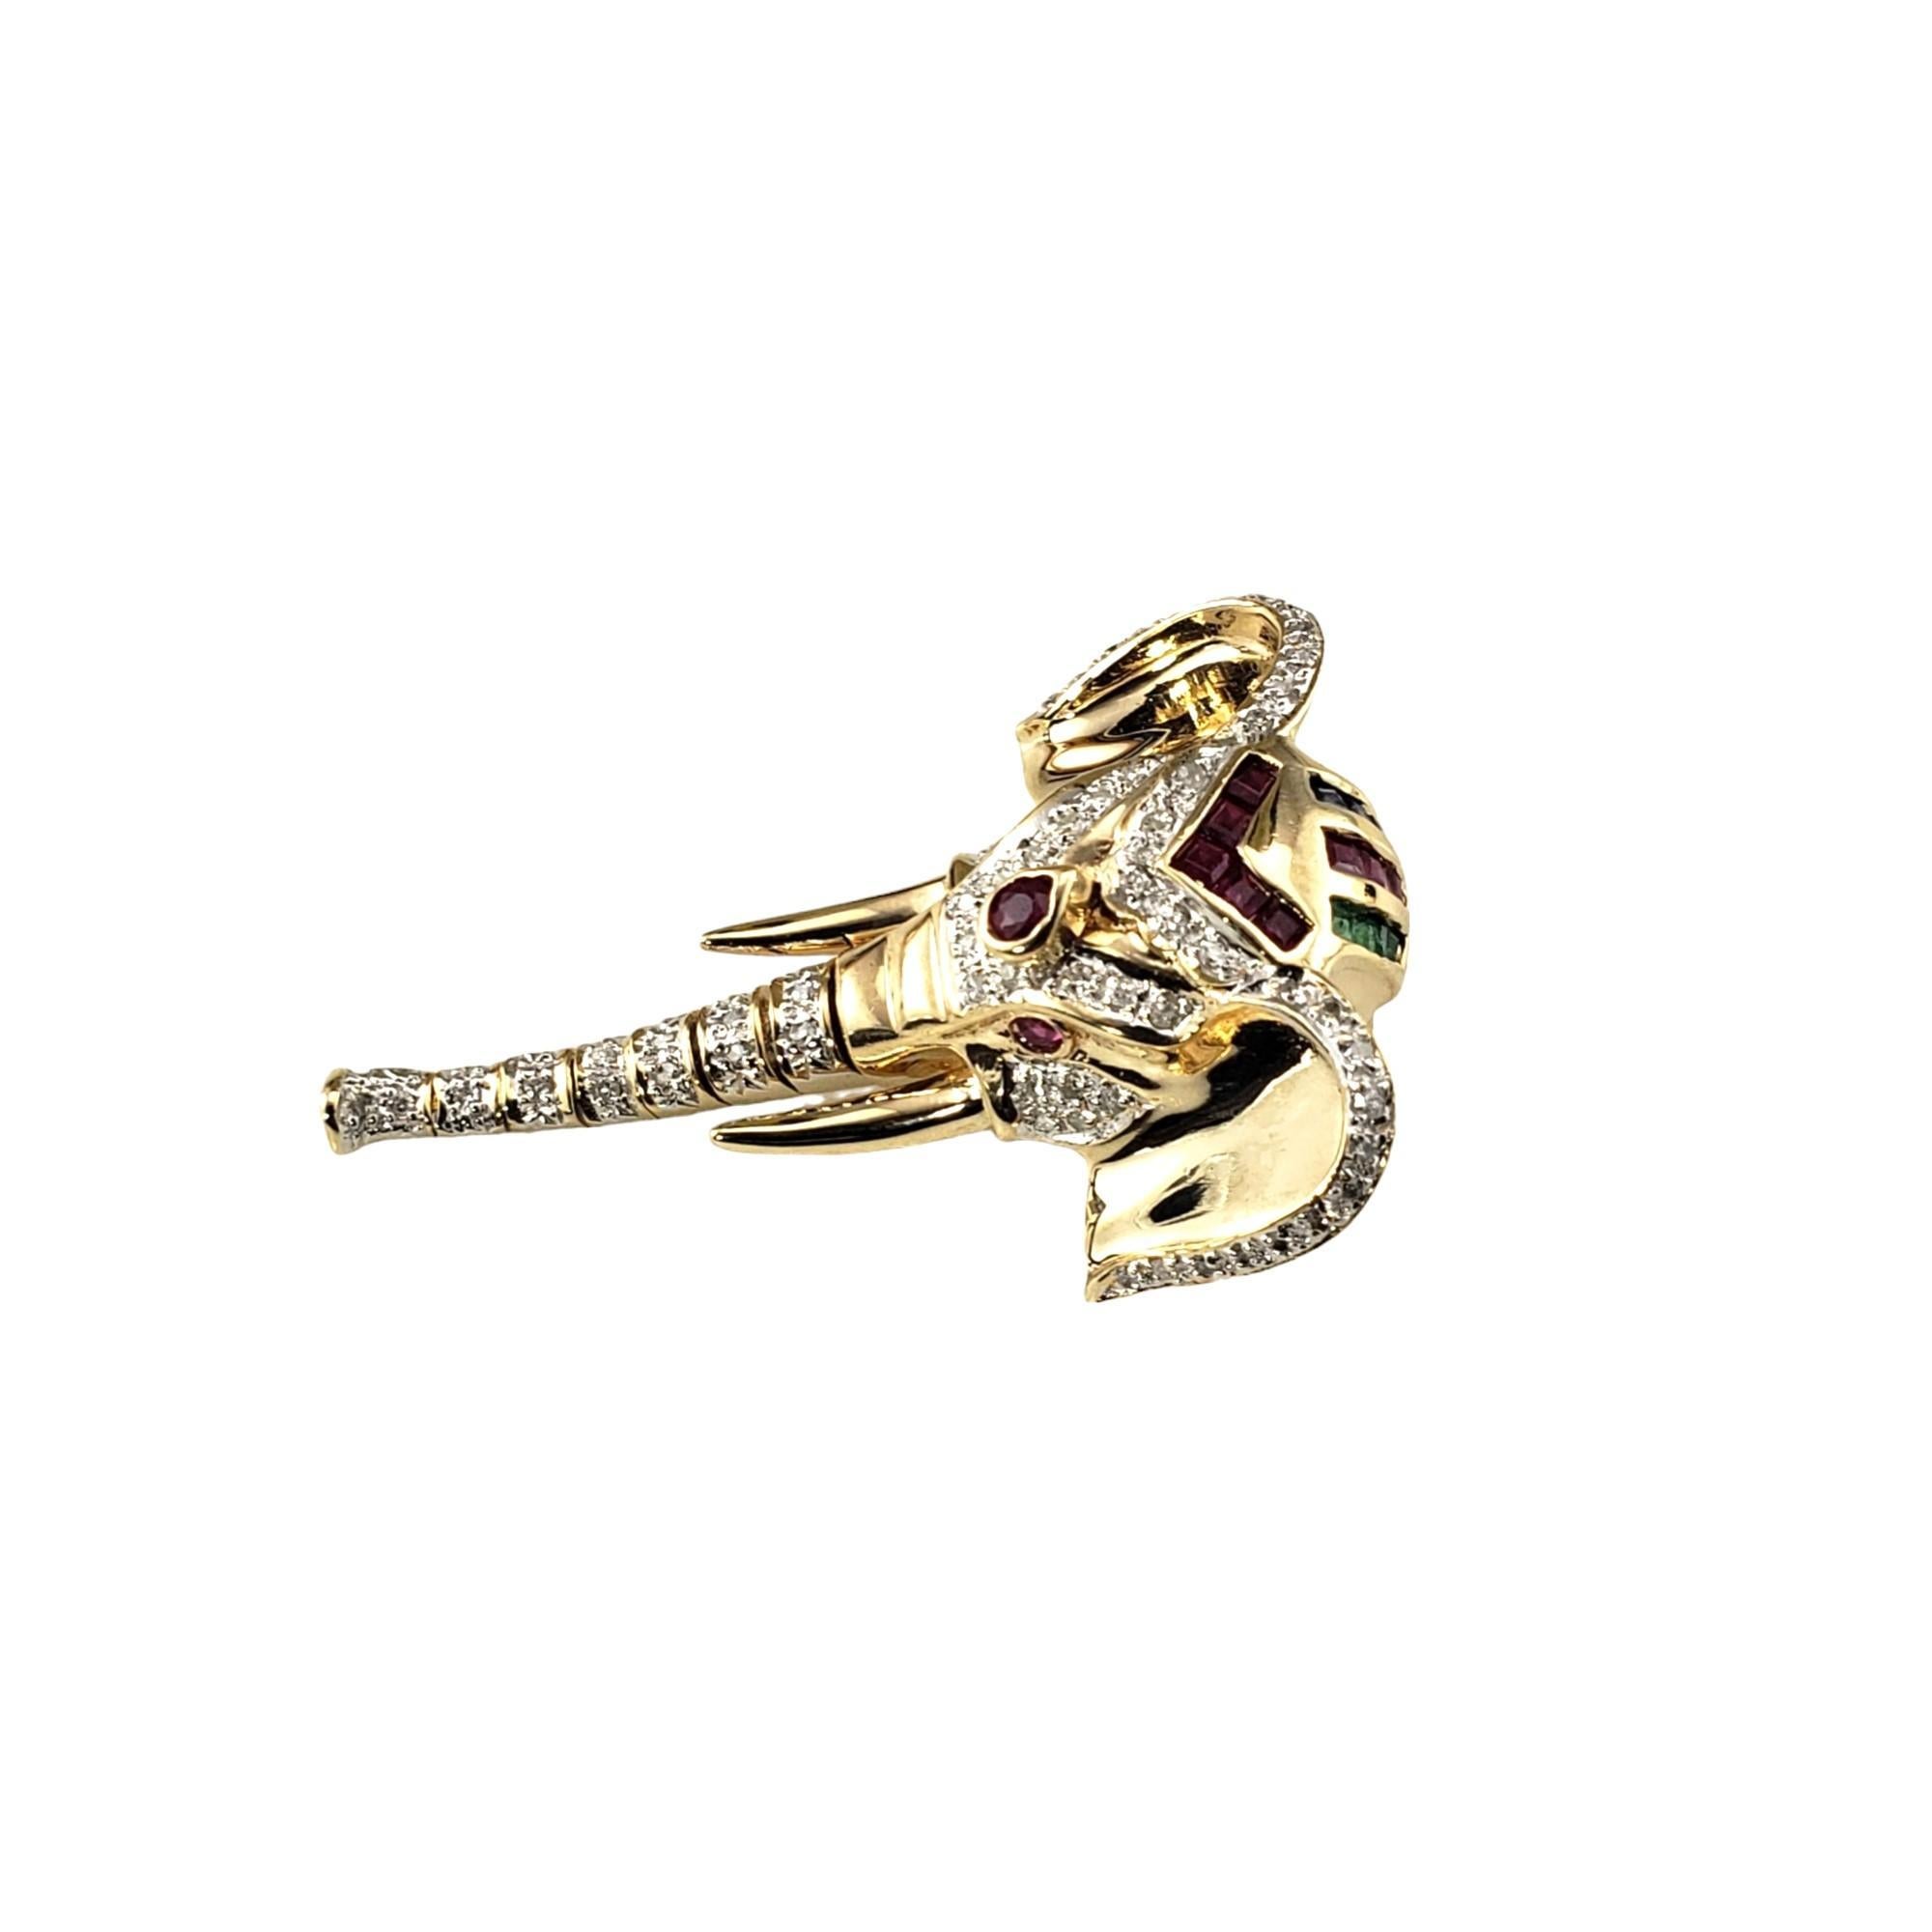 Vintage 18K Yellow Gold Diamond, Ruby, Sapphire and Elephant Pendant-

This stunning pendant features 63 round single cut diamonds, eight square rubies, three round rubies, three square sapphires and three square emeralds set in beautifully detailed